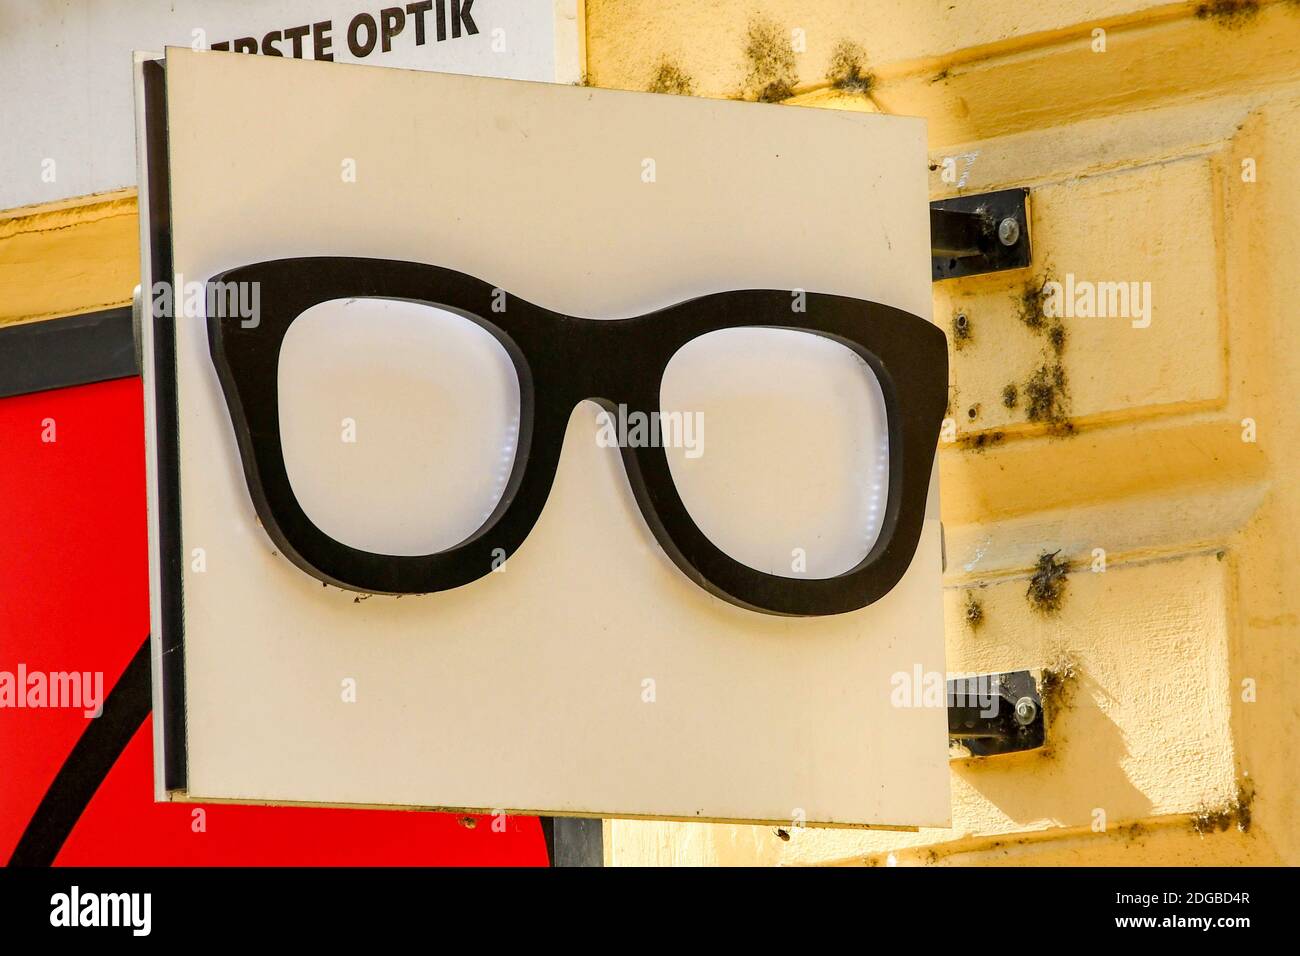 PRAGUE, CZECH REPUBLIC - JULY 2018: Large pair of glasses frames on a sign hanging outside an optician's shop in Prague Stock Photo